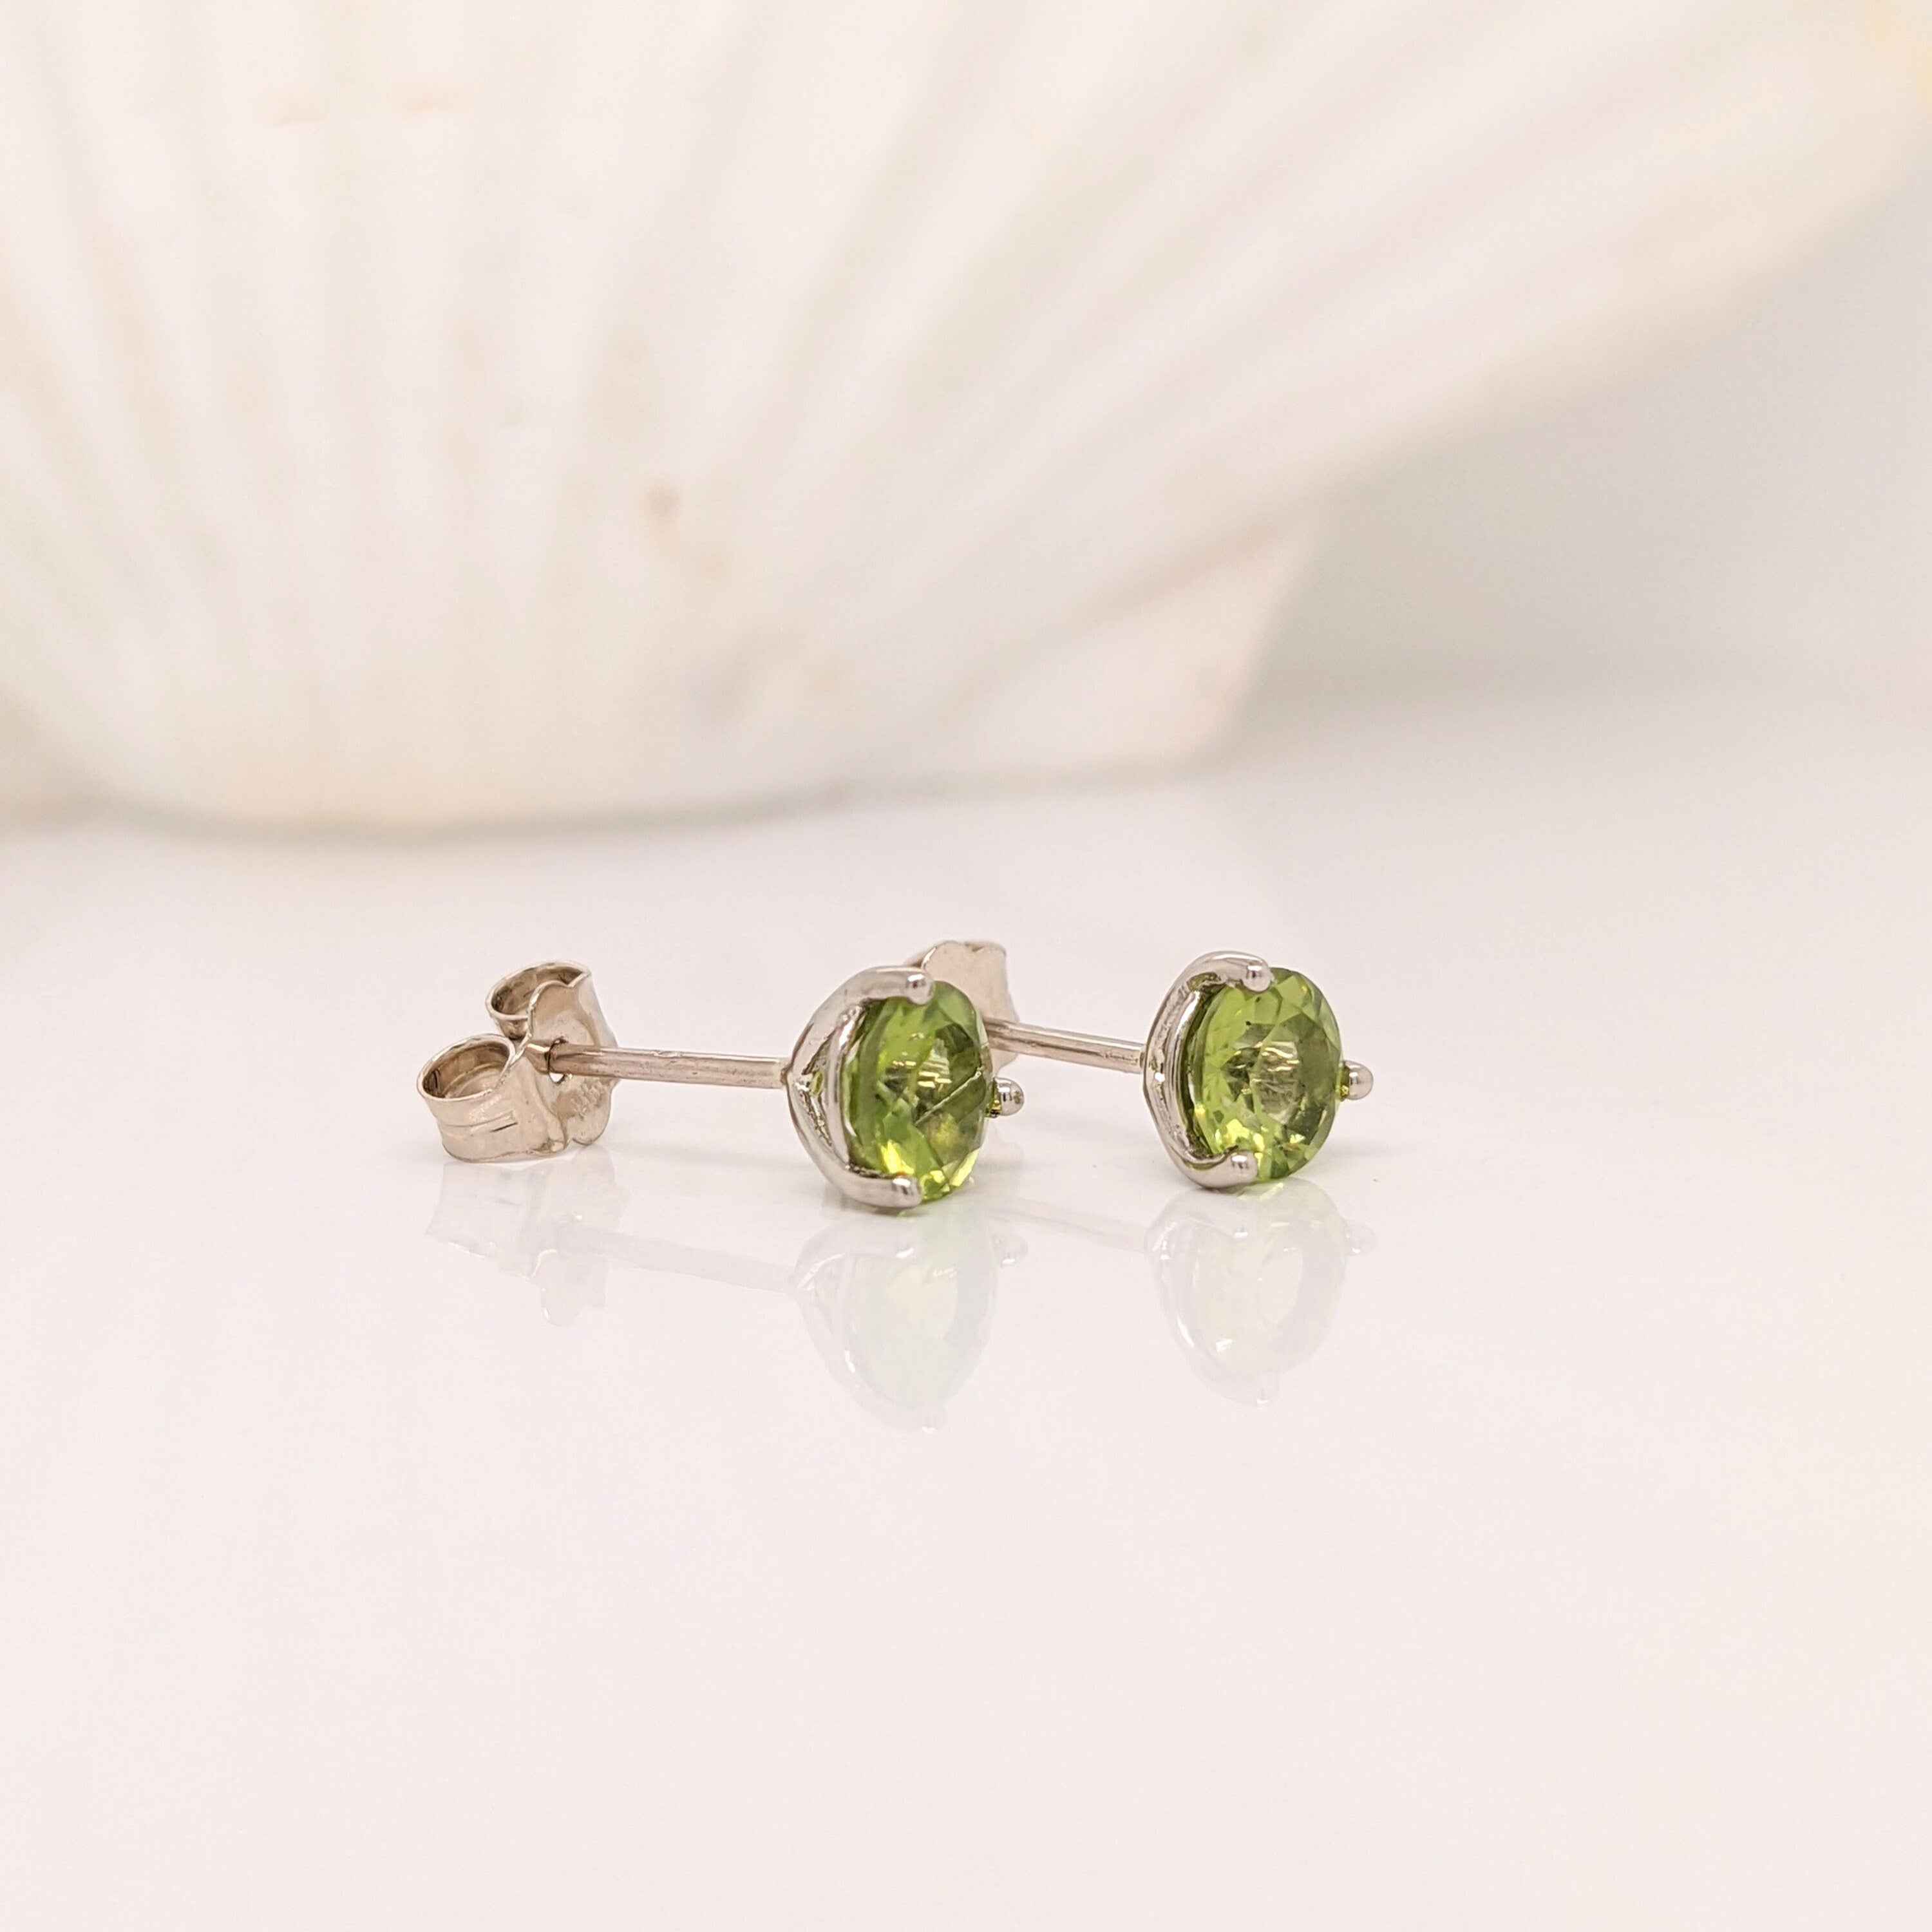 Sparkly Martini Peridot Studs in 14K White, Yellow or Rose Gold | Round 4mm, 5mm | August Birthstone | Green Gems | Earrings | 3 Prong